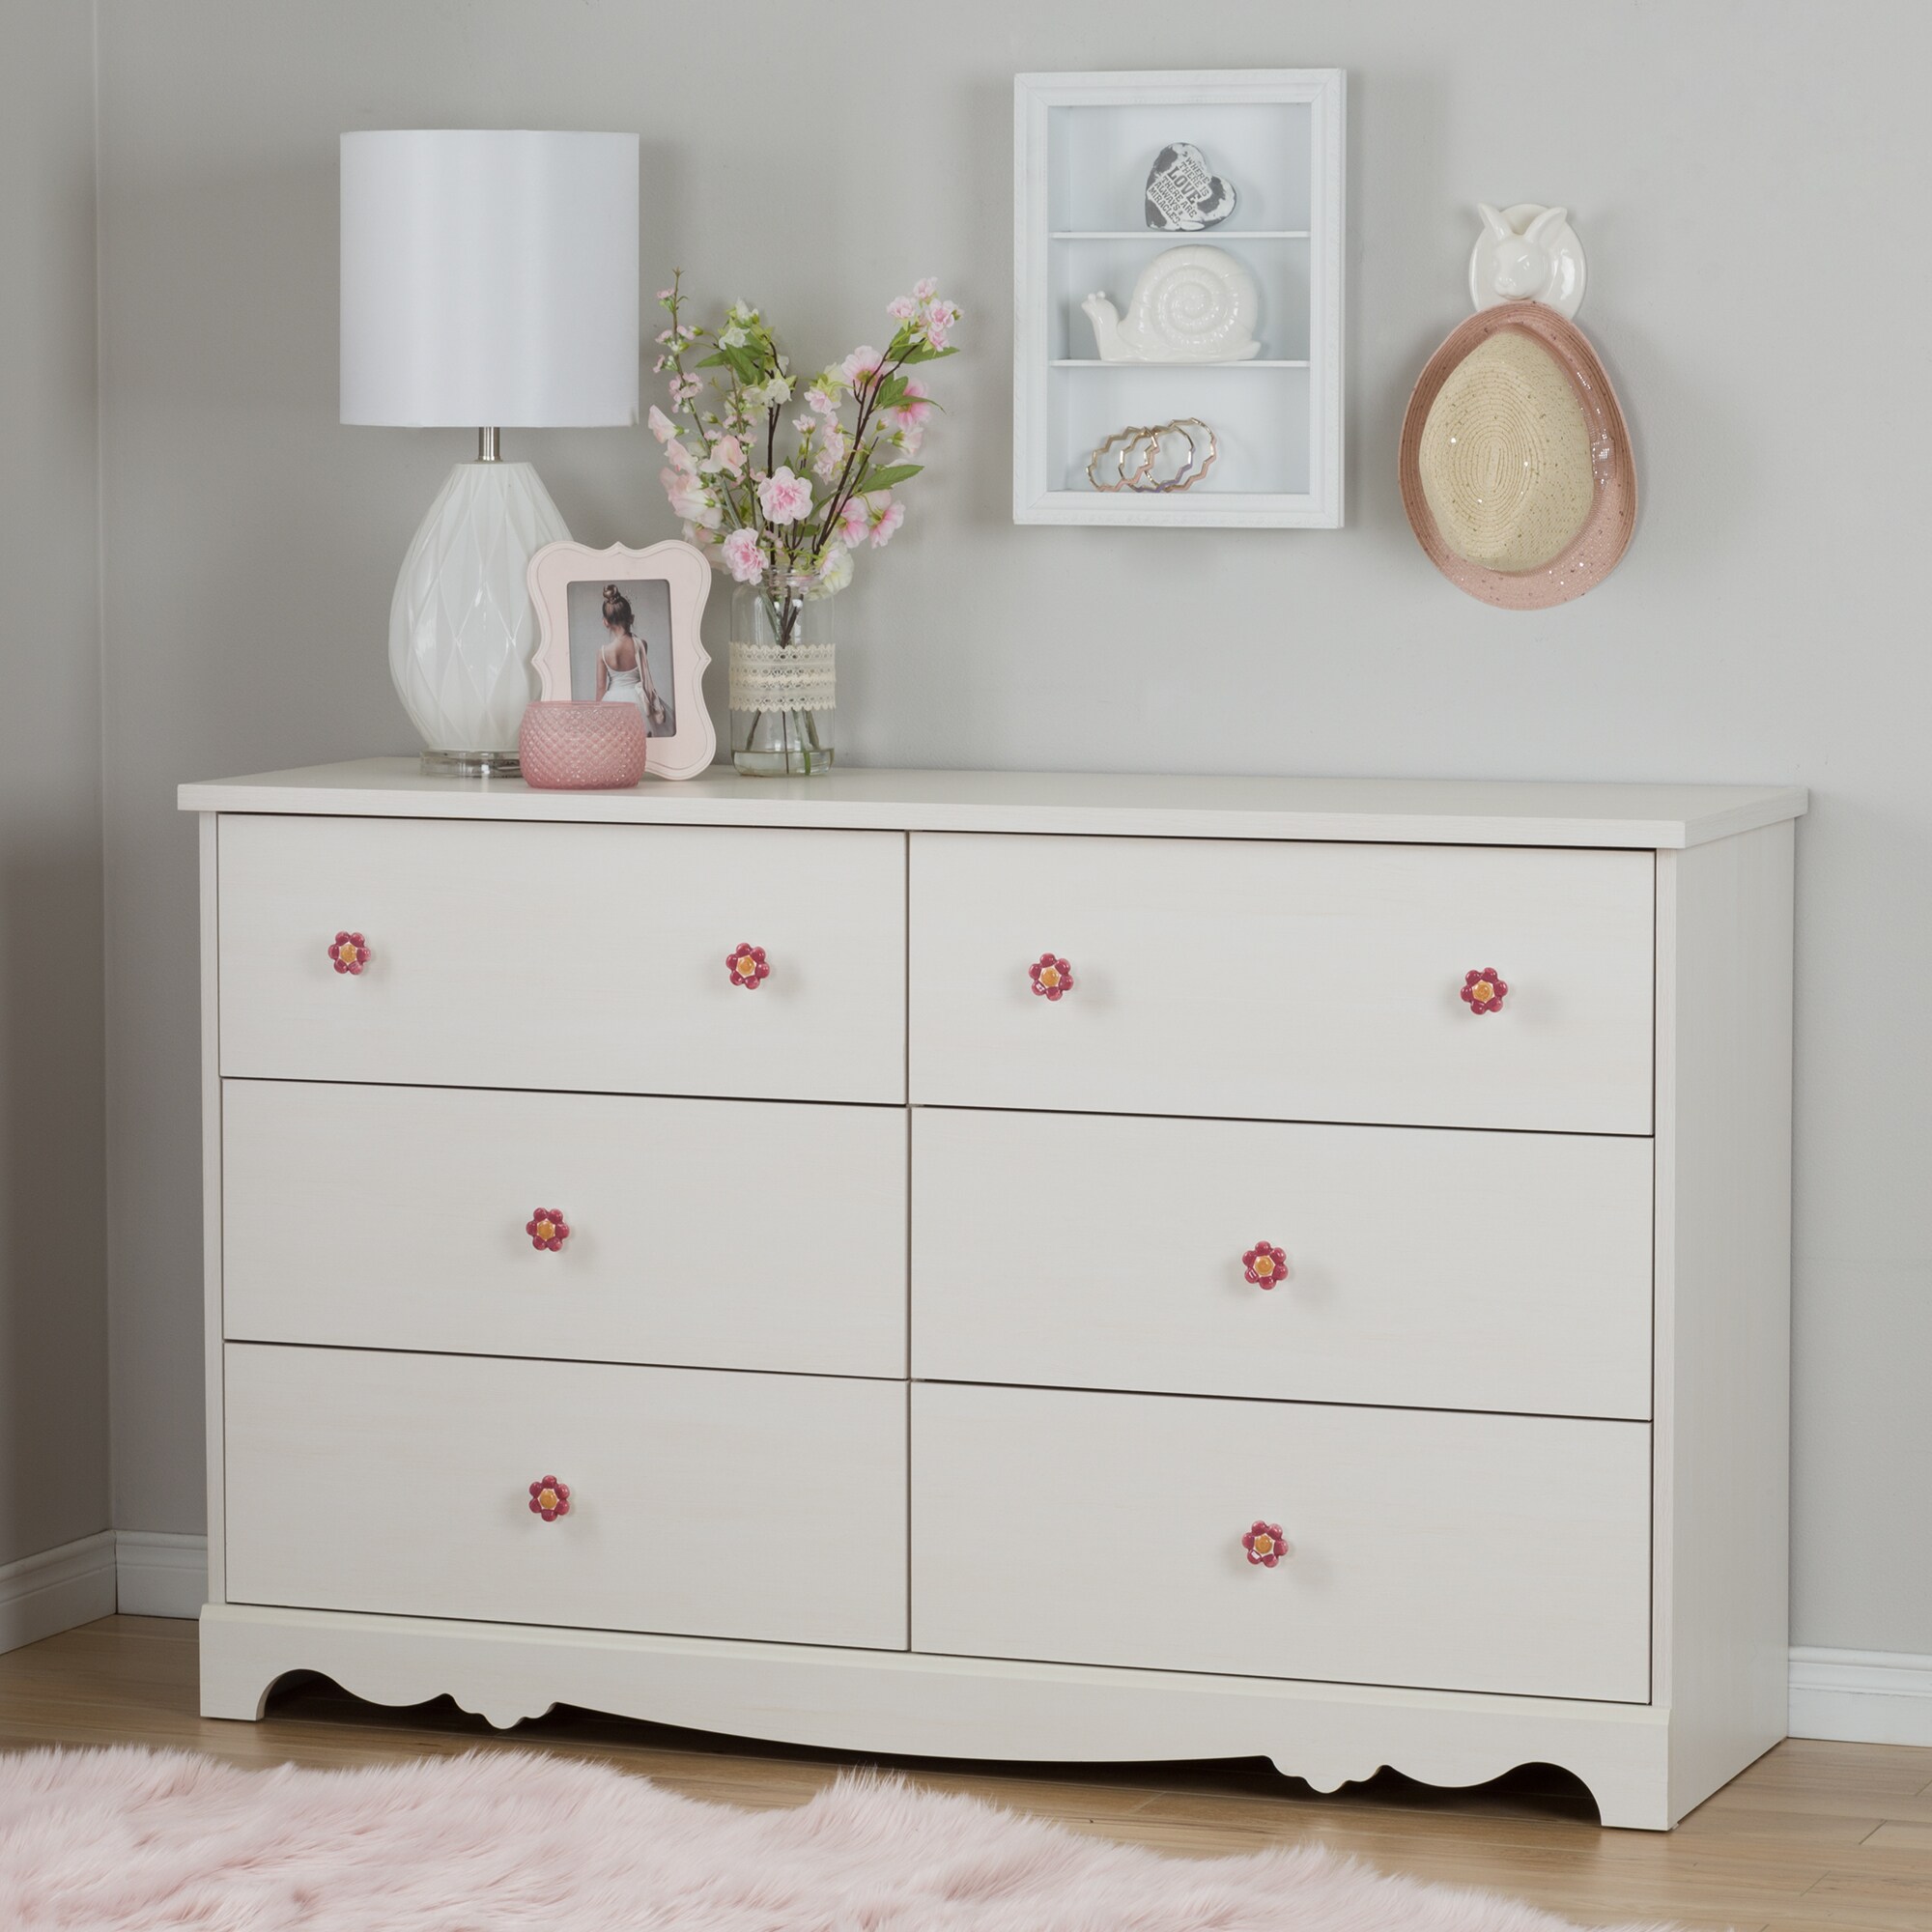 Shop South Shore Lily Rose 6 Drawer Double Dresser Overstock